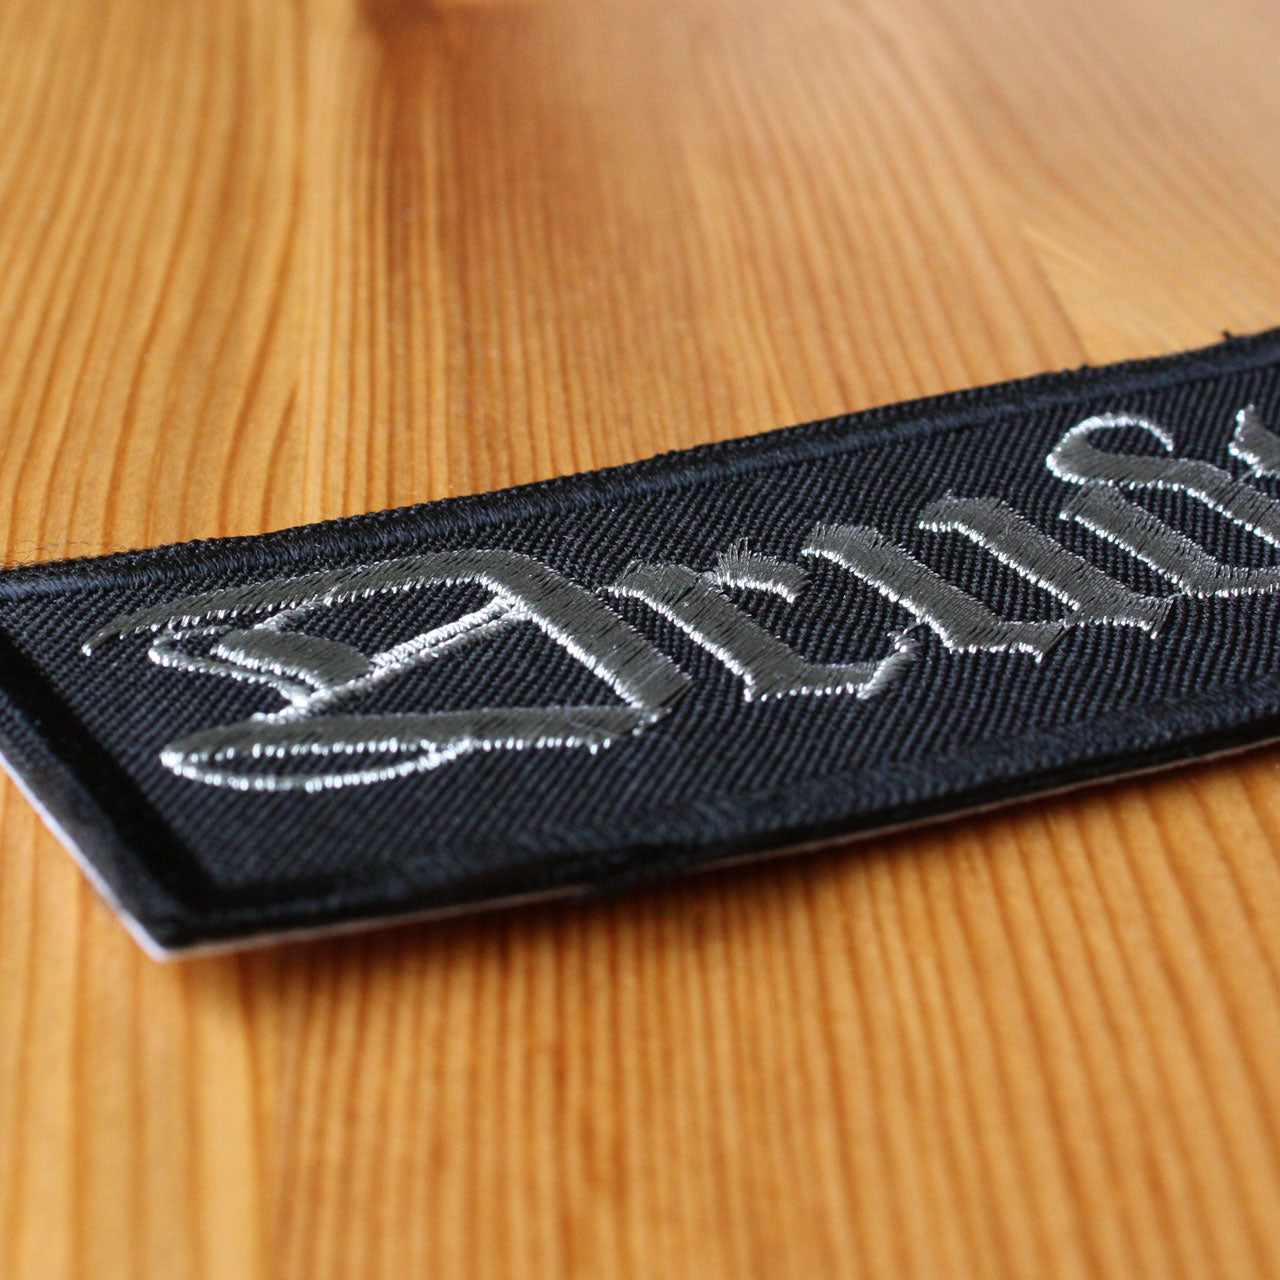 Drudkh - Silver Logo (Embroidered Patch)